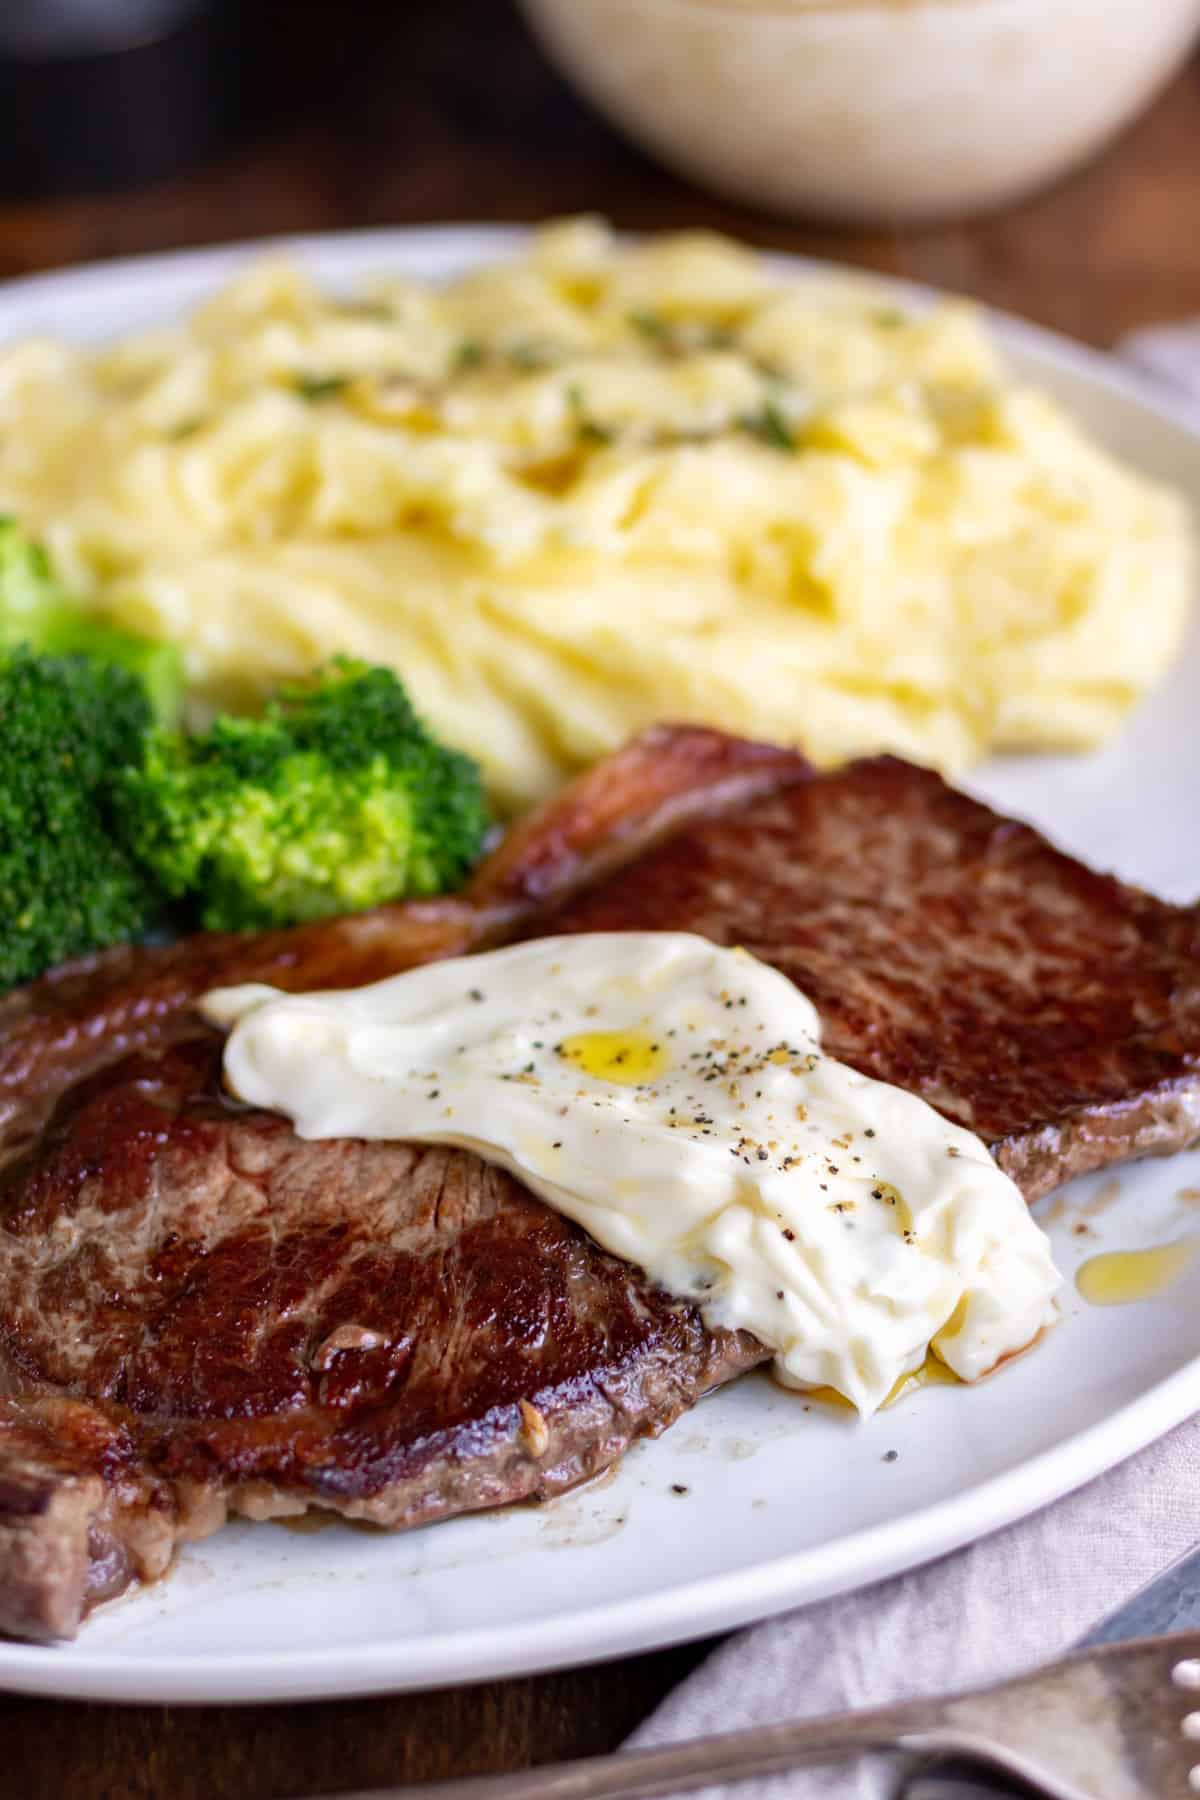 A plate with mashed potato, broccoli and steak with a dollop of truffle aioli.